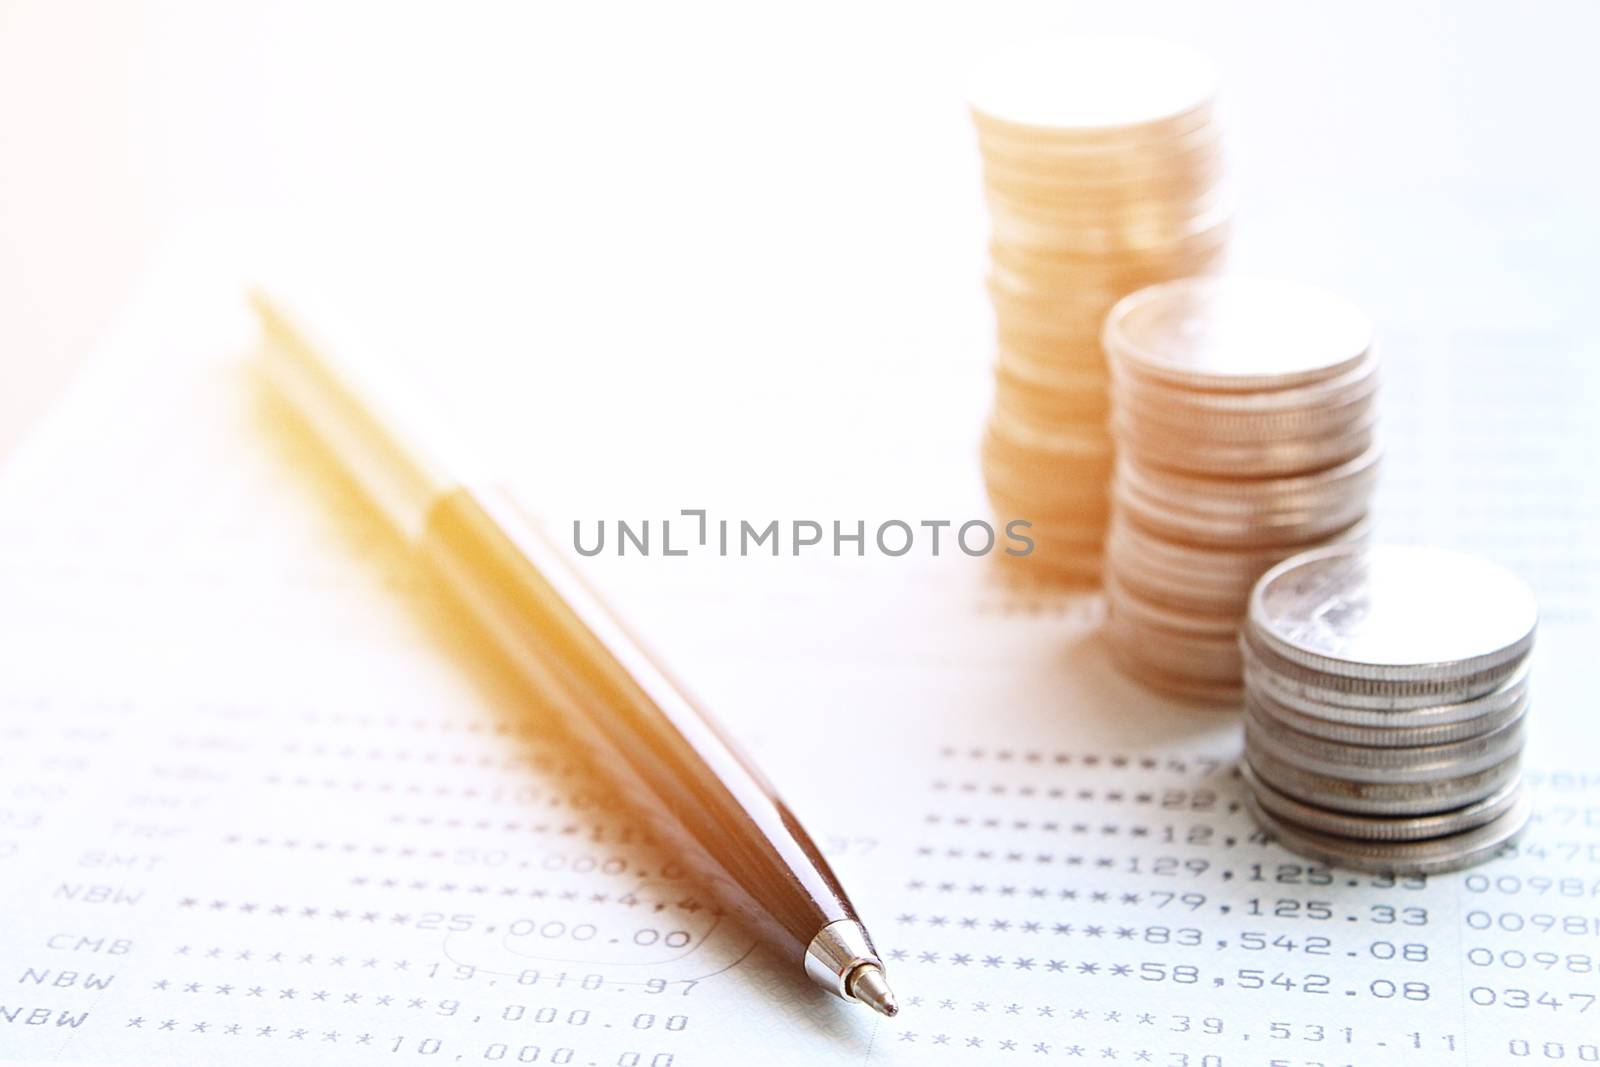 Business, finance, saving money or investment concept : Coin stacks, pen and savings account passbook or financial statement on office desk table